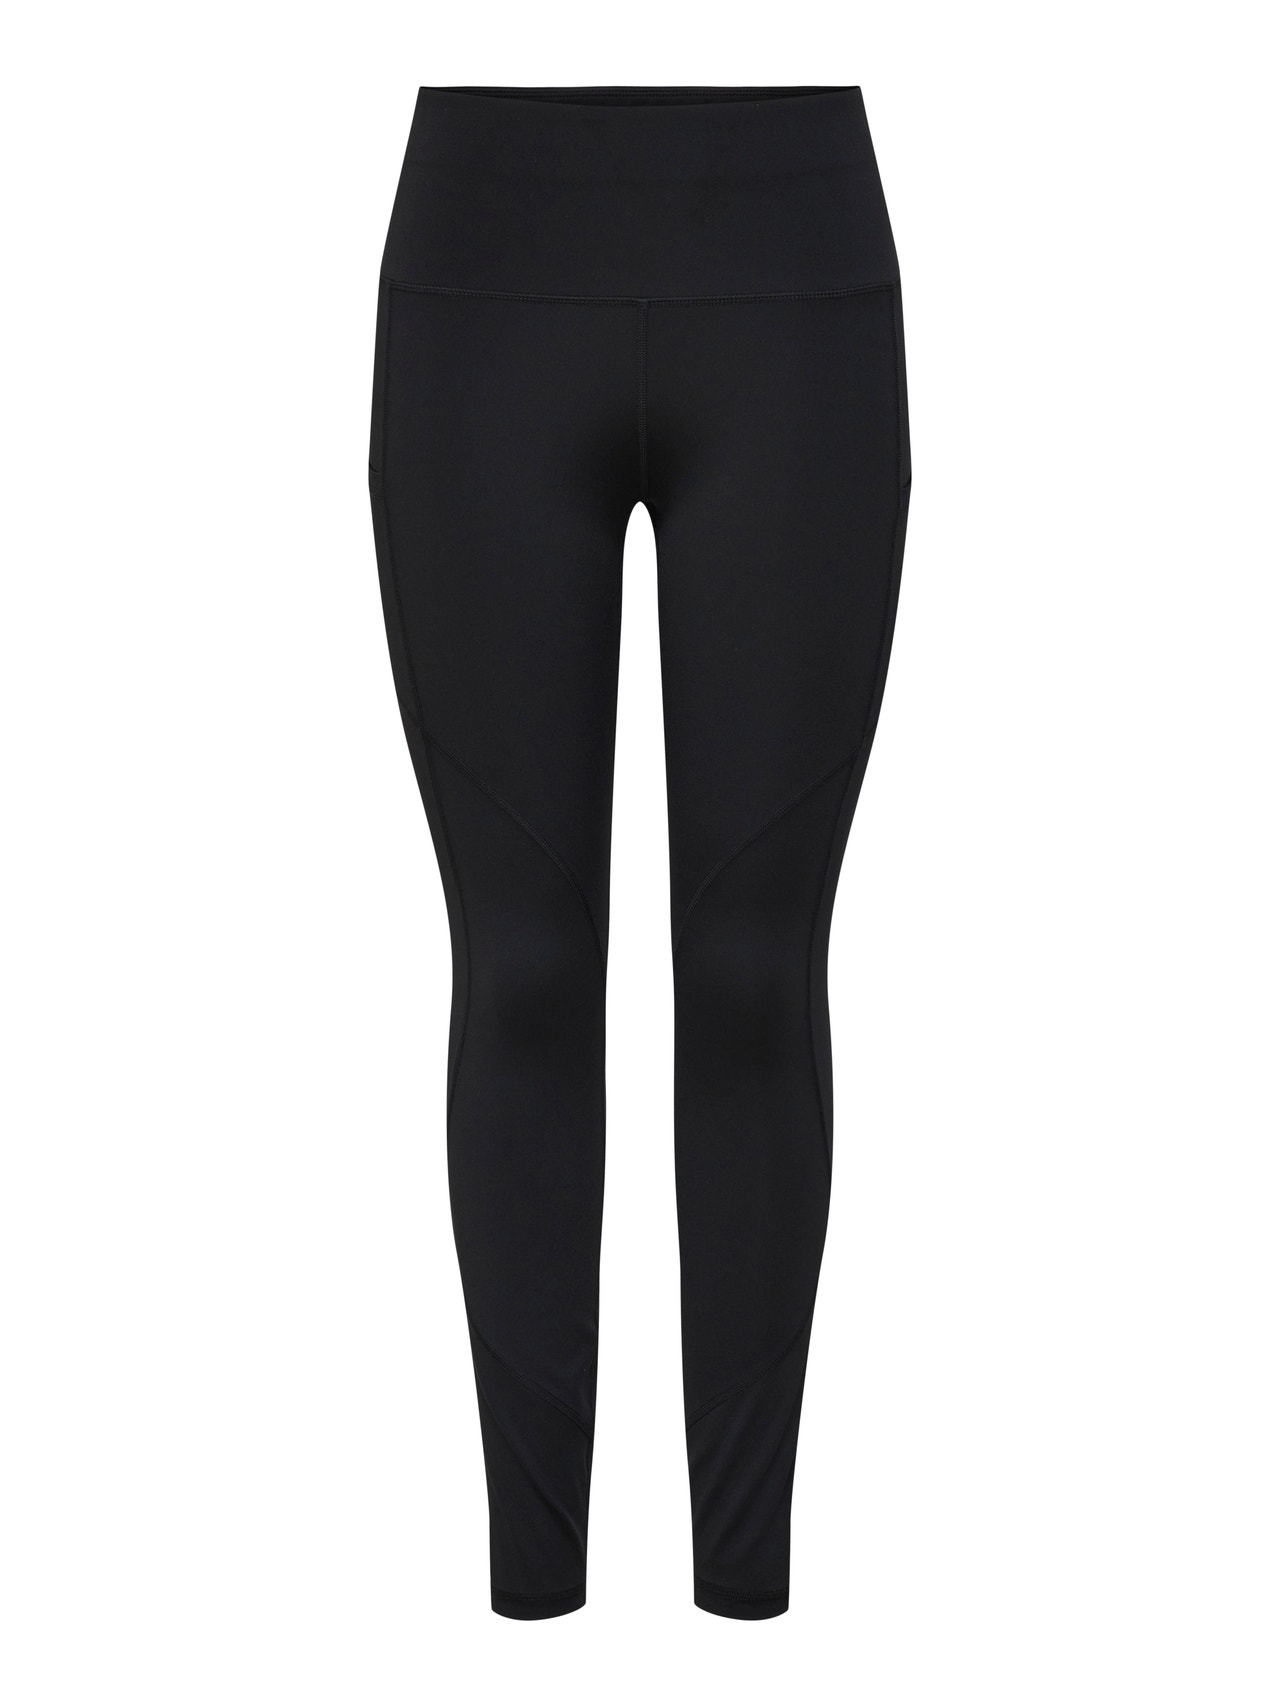 ONLY High waist Training Tights -Black - 15250666